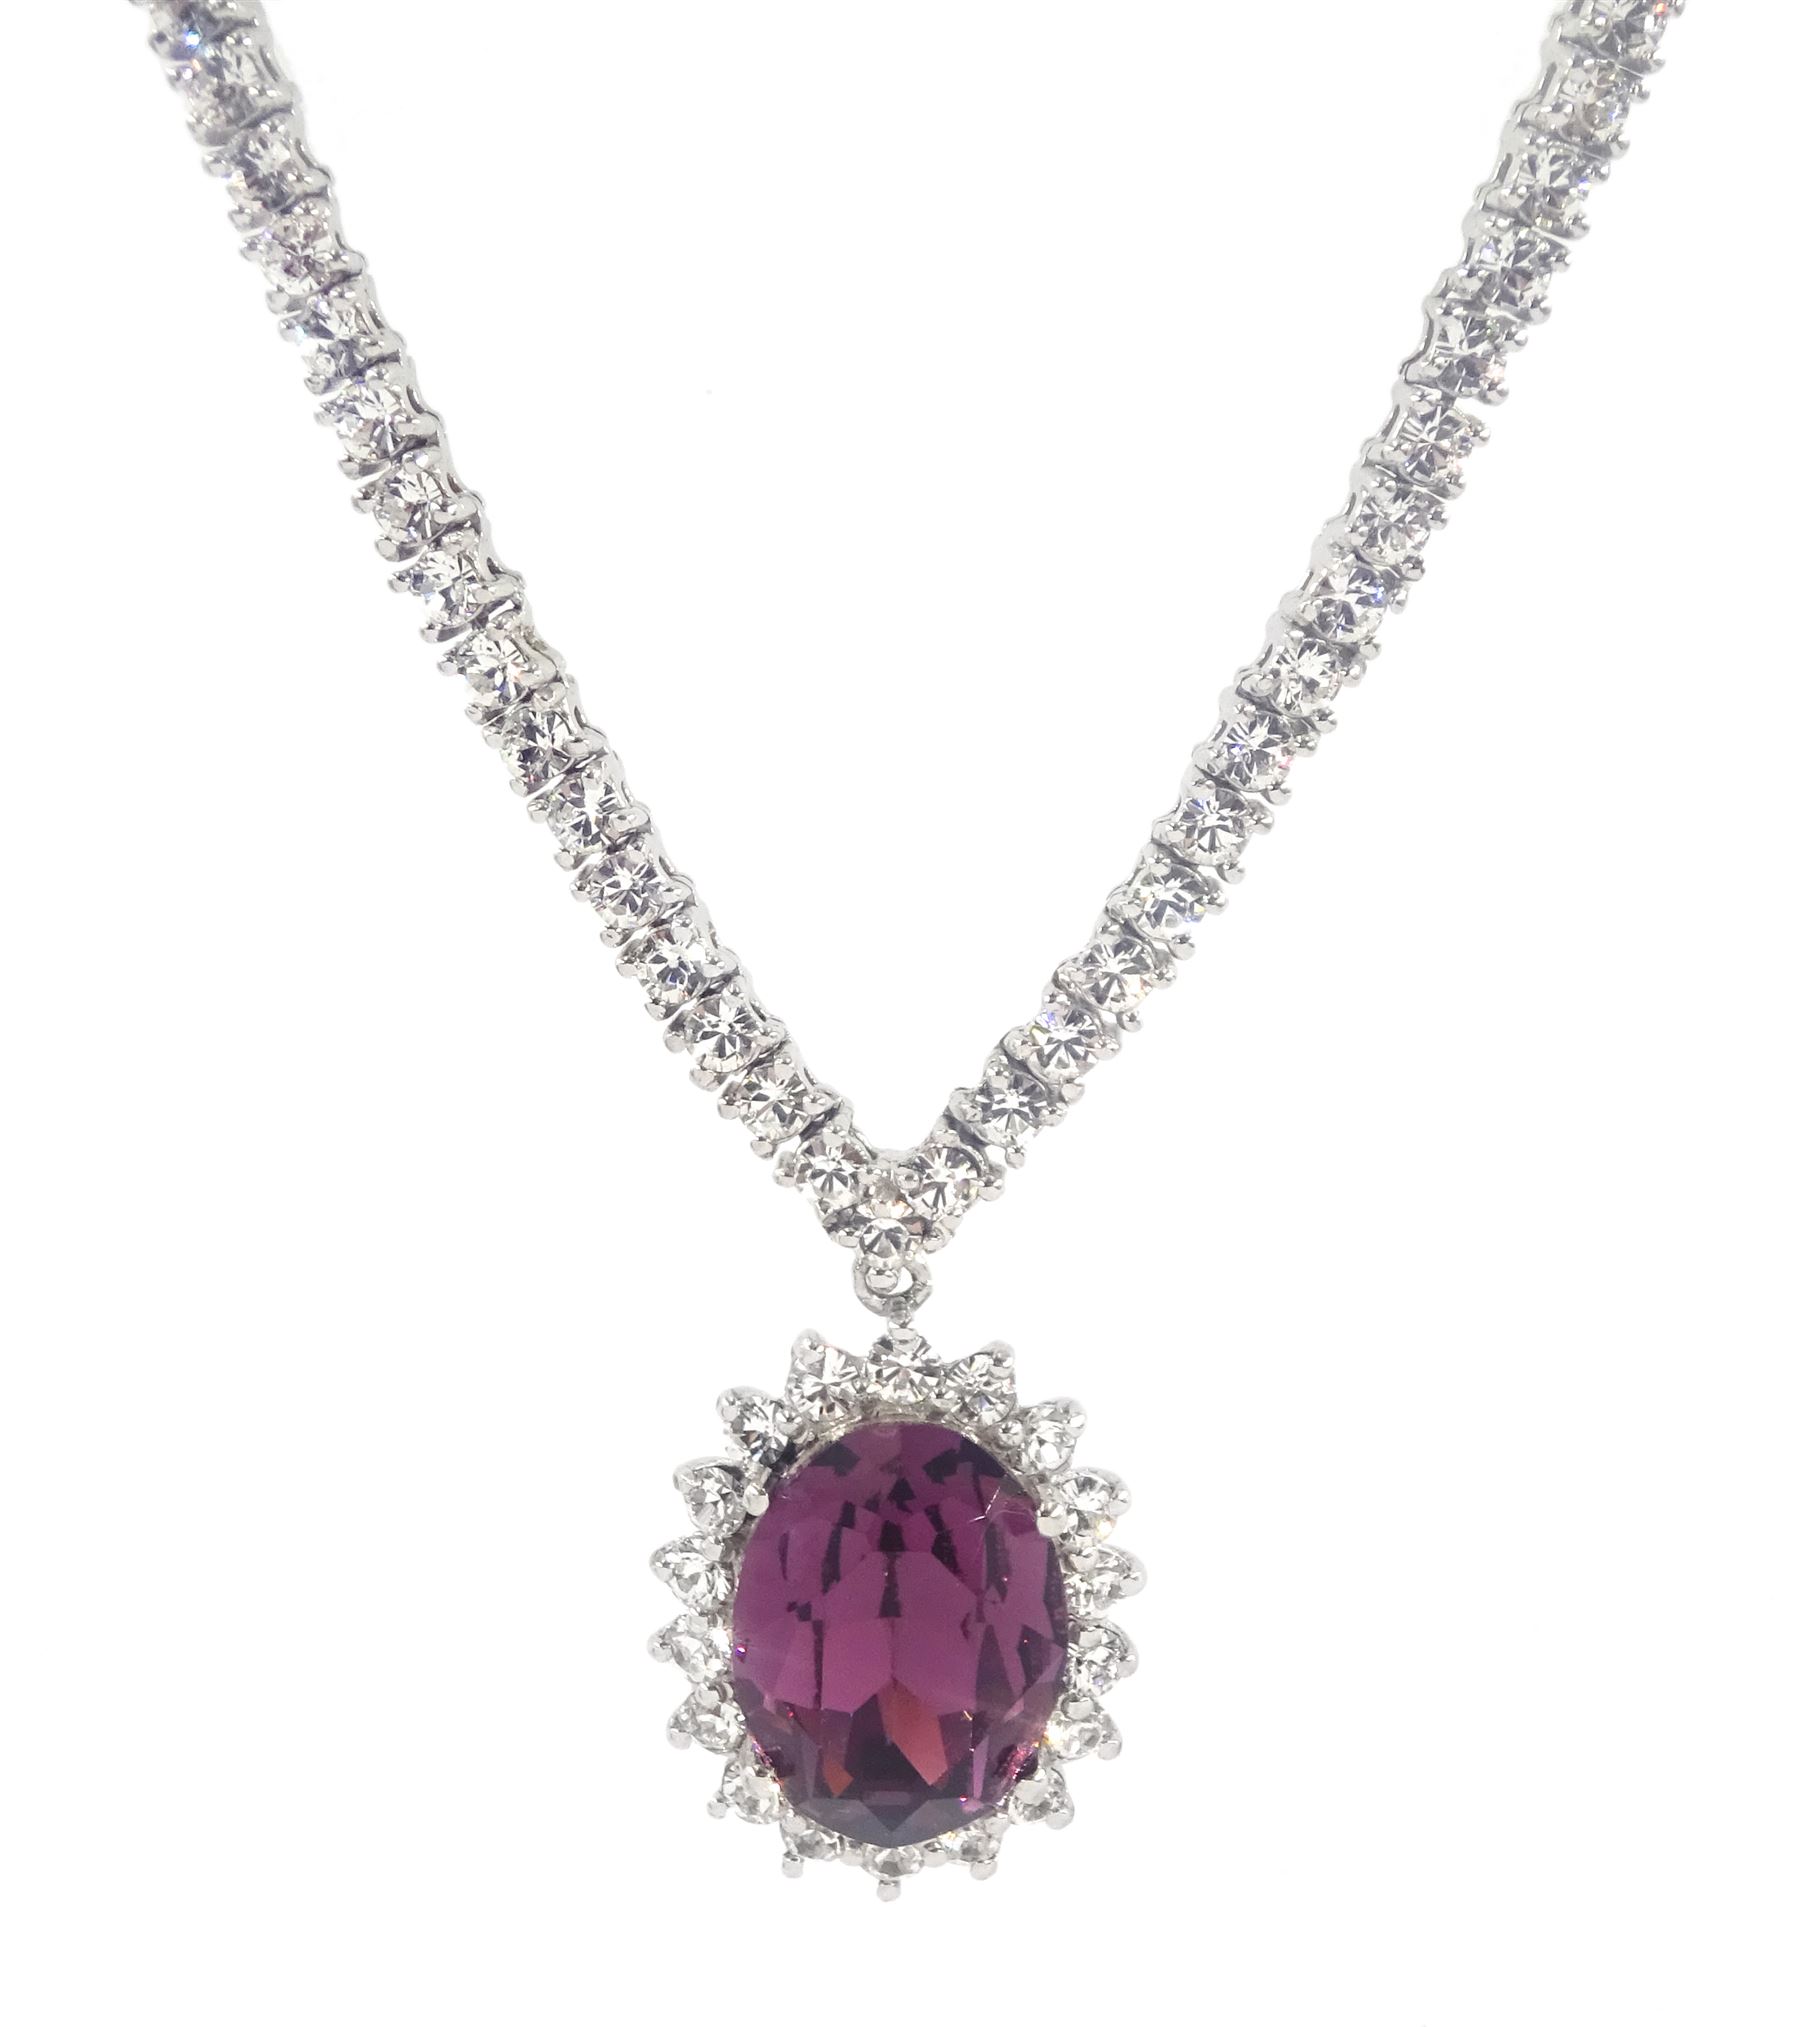 Silver cubic zirconia and purple stone set cluster pendant dress necklace